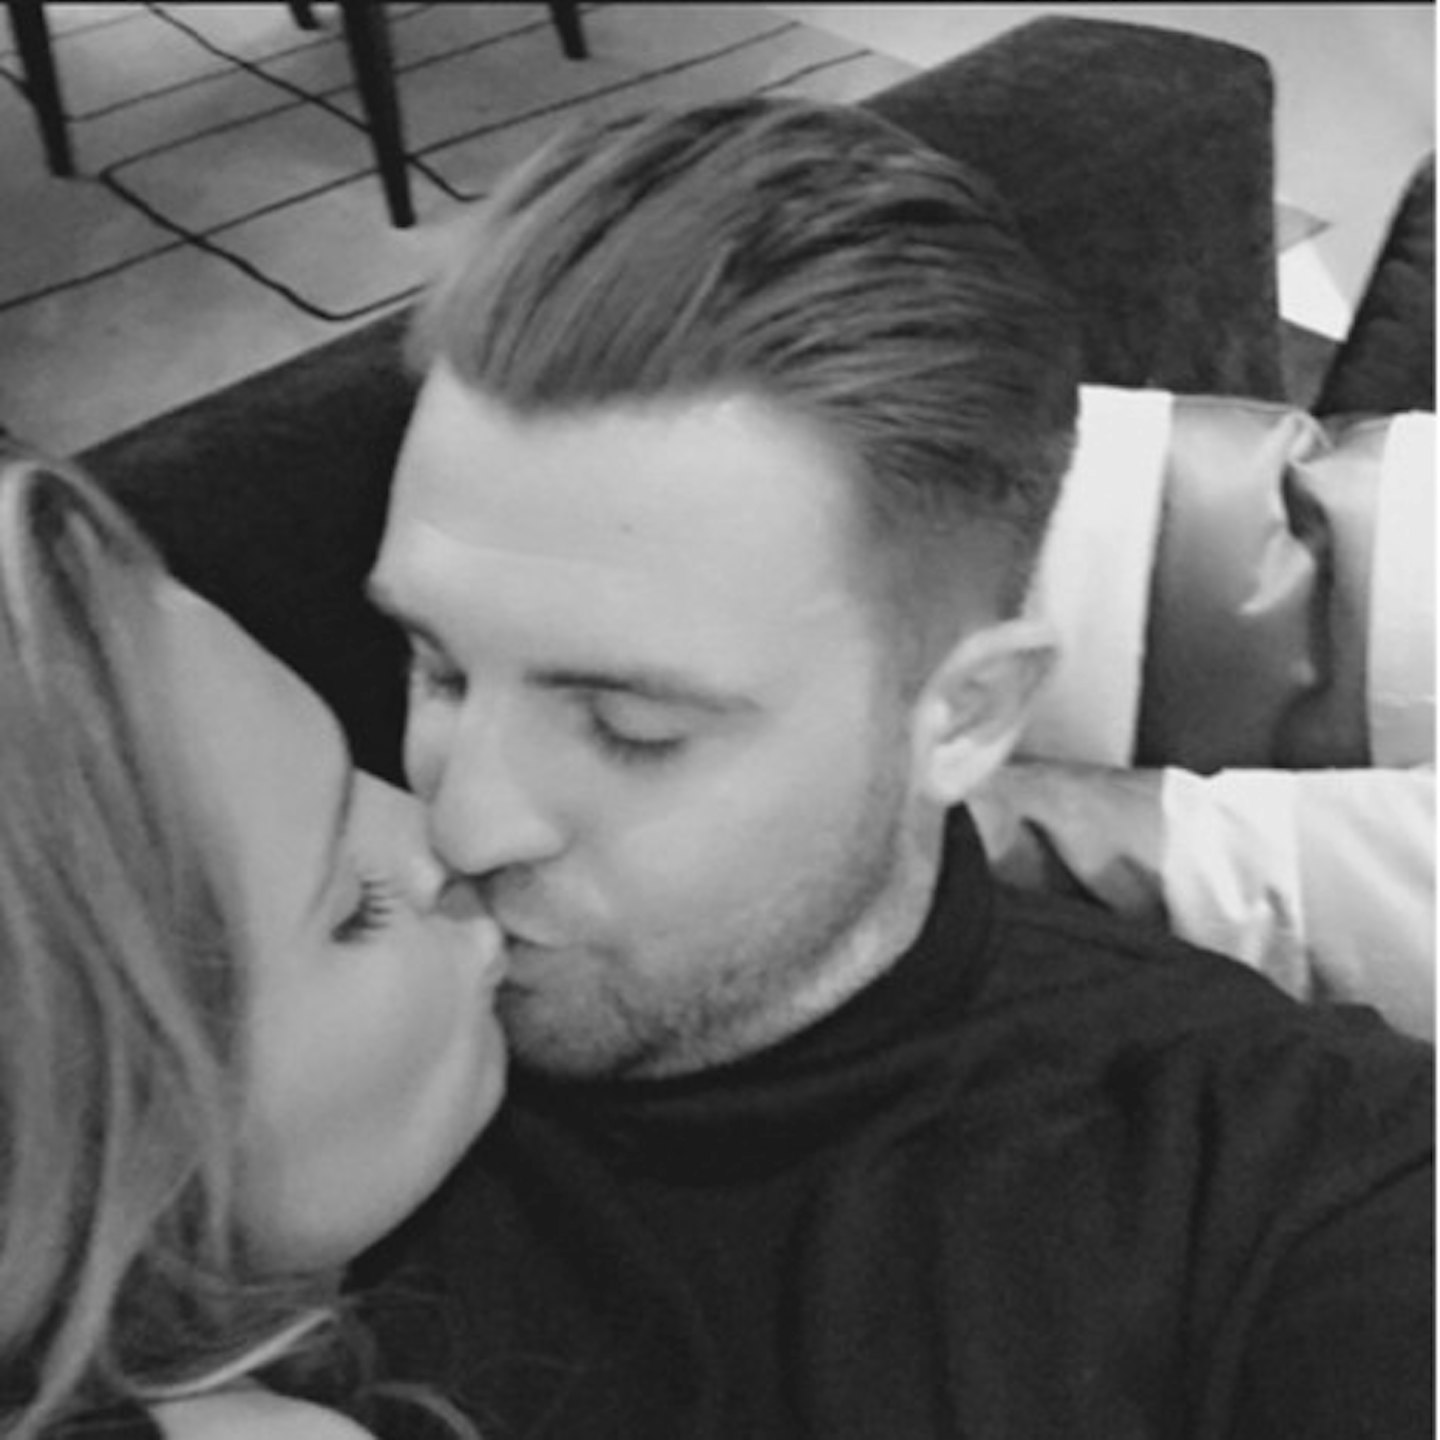 Danielle's rep claims she and Tom are no longer together